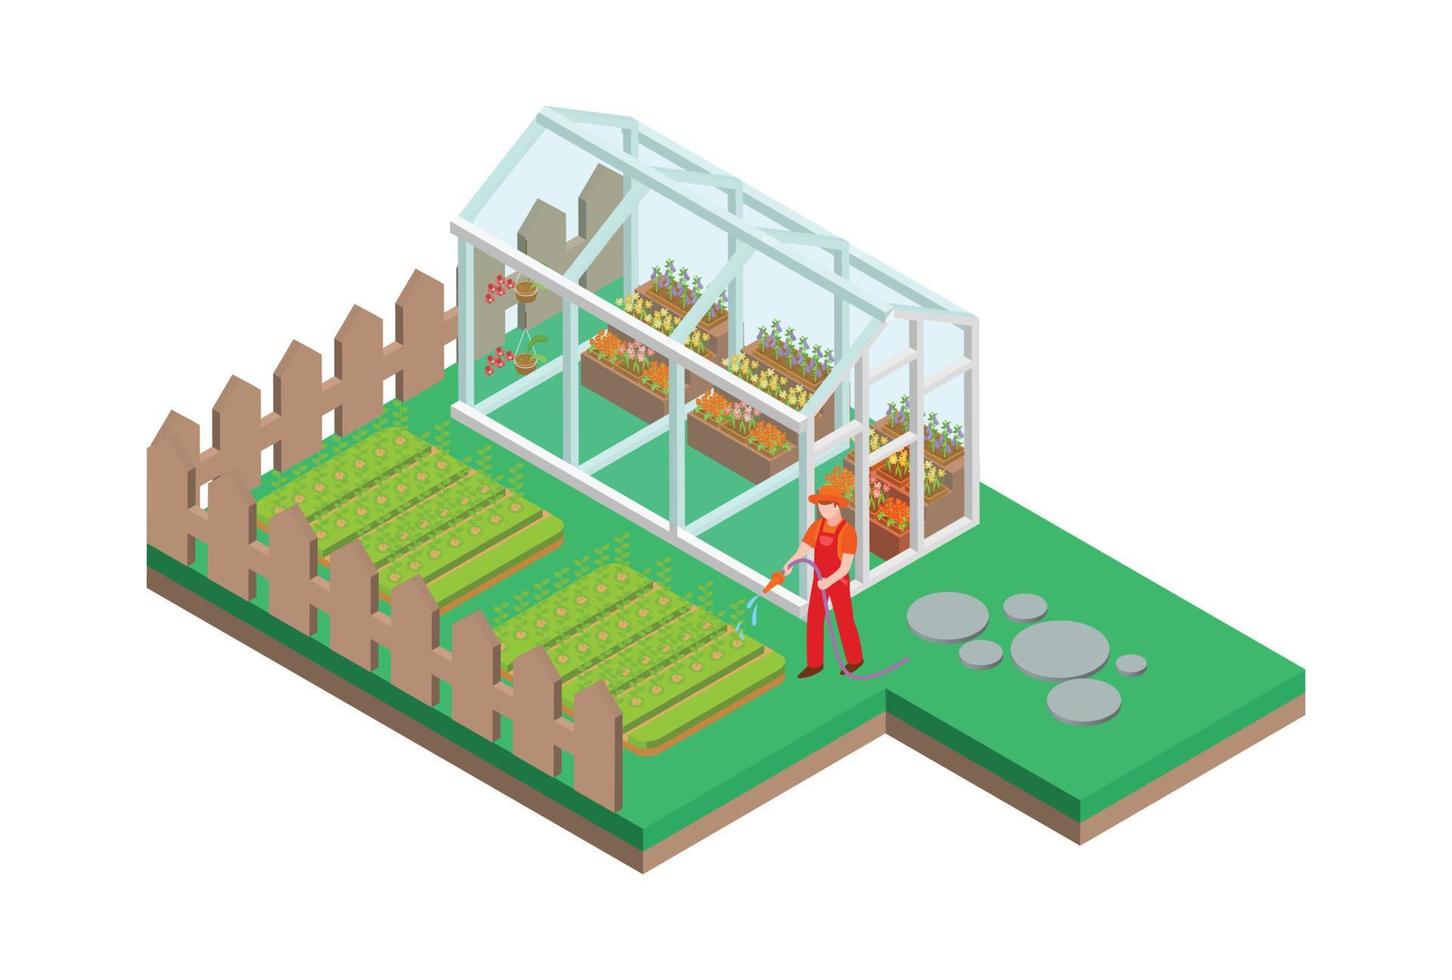 Isometric greenhouse with glass walls, foundations, gable roof, garden bed. Mass farm for growing plants. Suitable for Diagrams, Infographics, Book Illustration, Game Asset, And Other Graphic Related vector